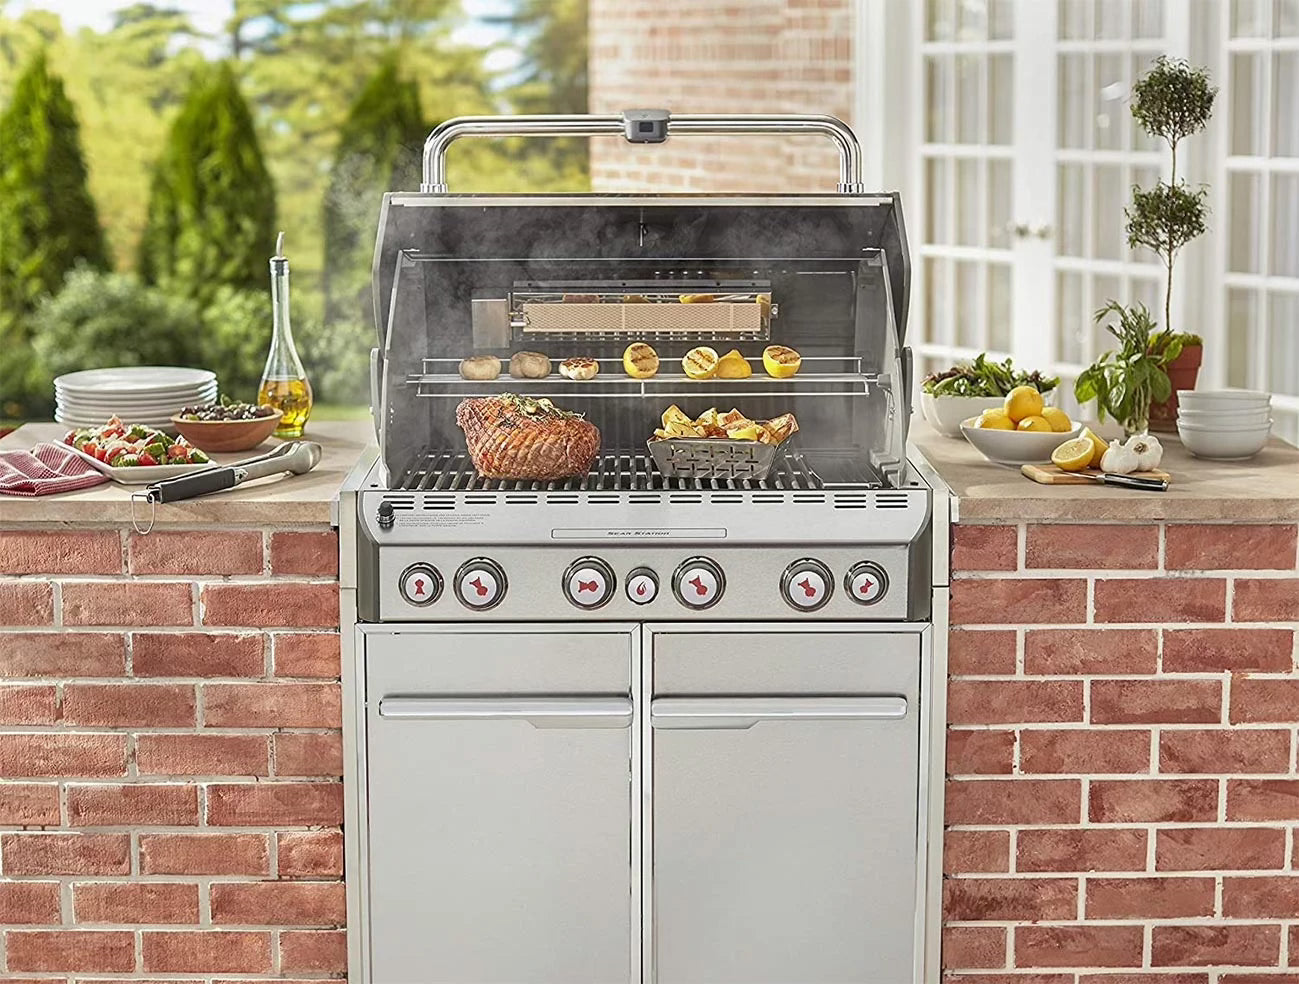 BBQ Cleaning is Back By Popular Demand! Deep Clean Your Outdoor BBQ With Bar-B-Clean! New Deal Now Includes Cabinets, Drawers, and Side Burners!